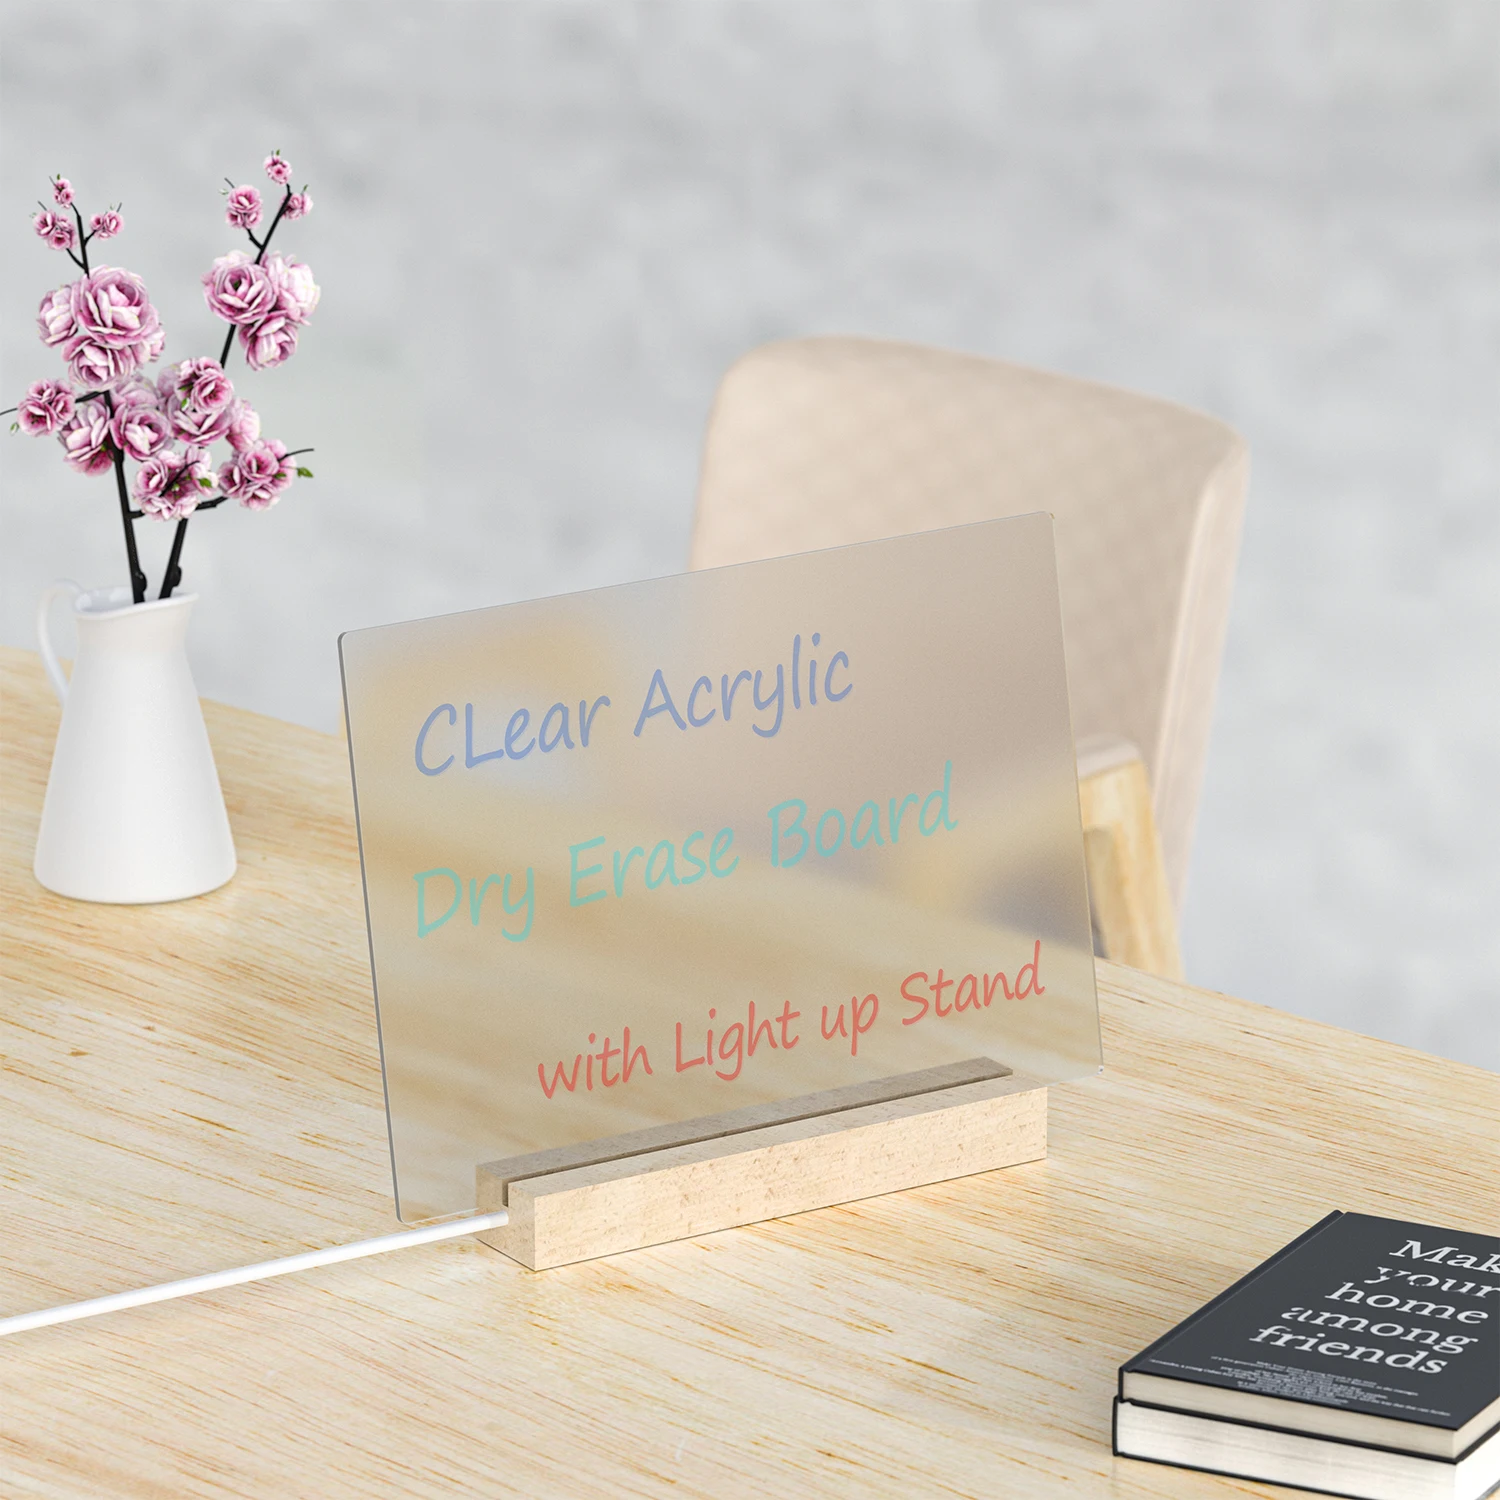 Led Light Dry Erase Acrylic Board Writing Board Acrylic Message Board With Wooden Base